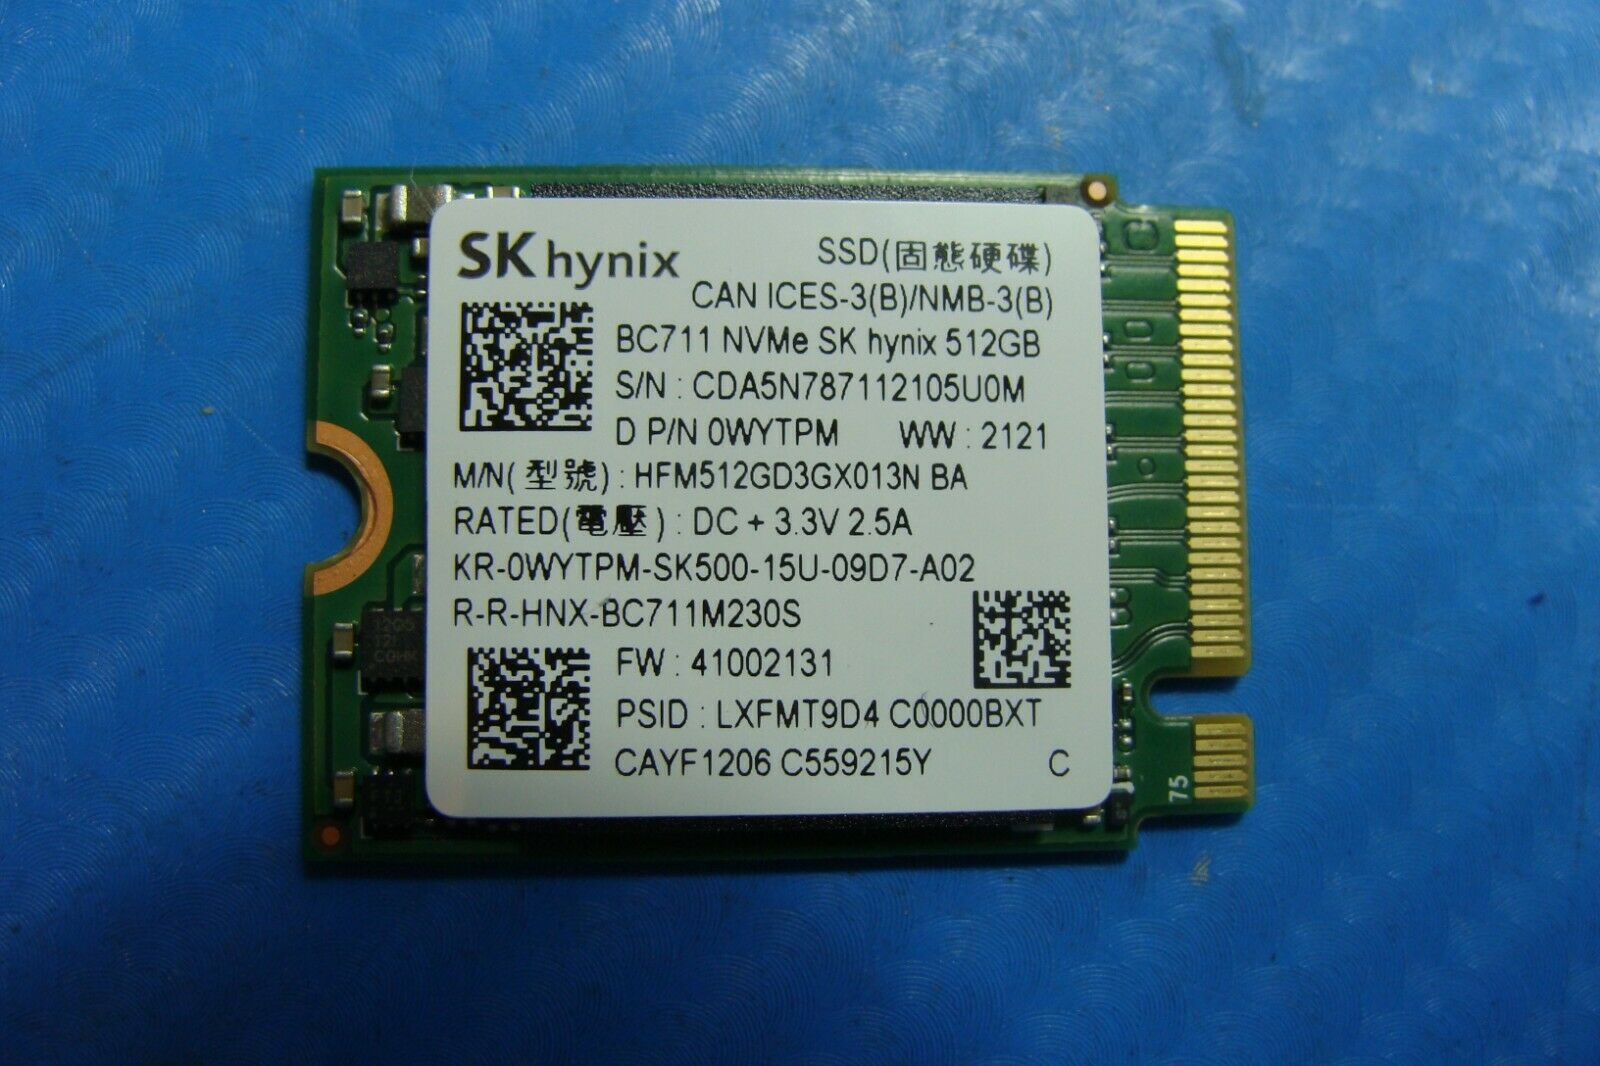 Dell 5410 SK Hynix 512GB NVMe M2 SSD Solid State Drive hfm512gd3gx013n wytpm - Laptop Parts - Buy Authentic Computer Parts - Top Seller Ebay